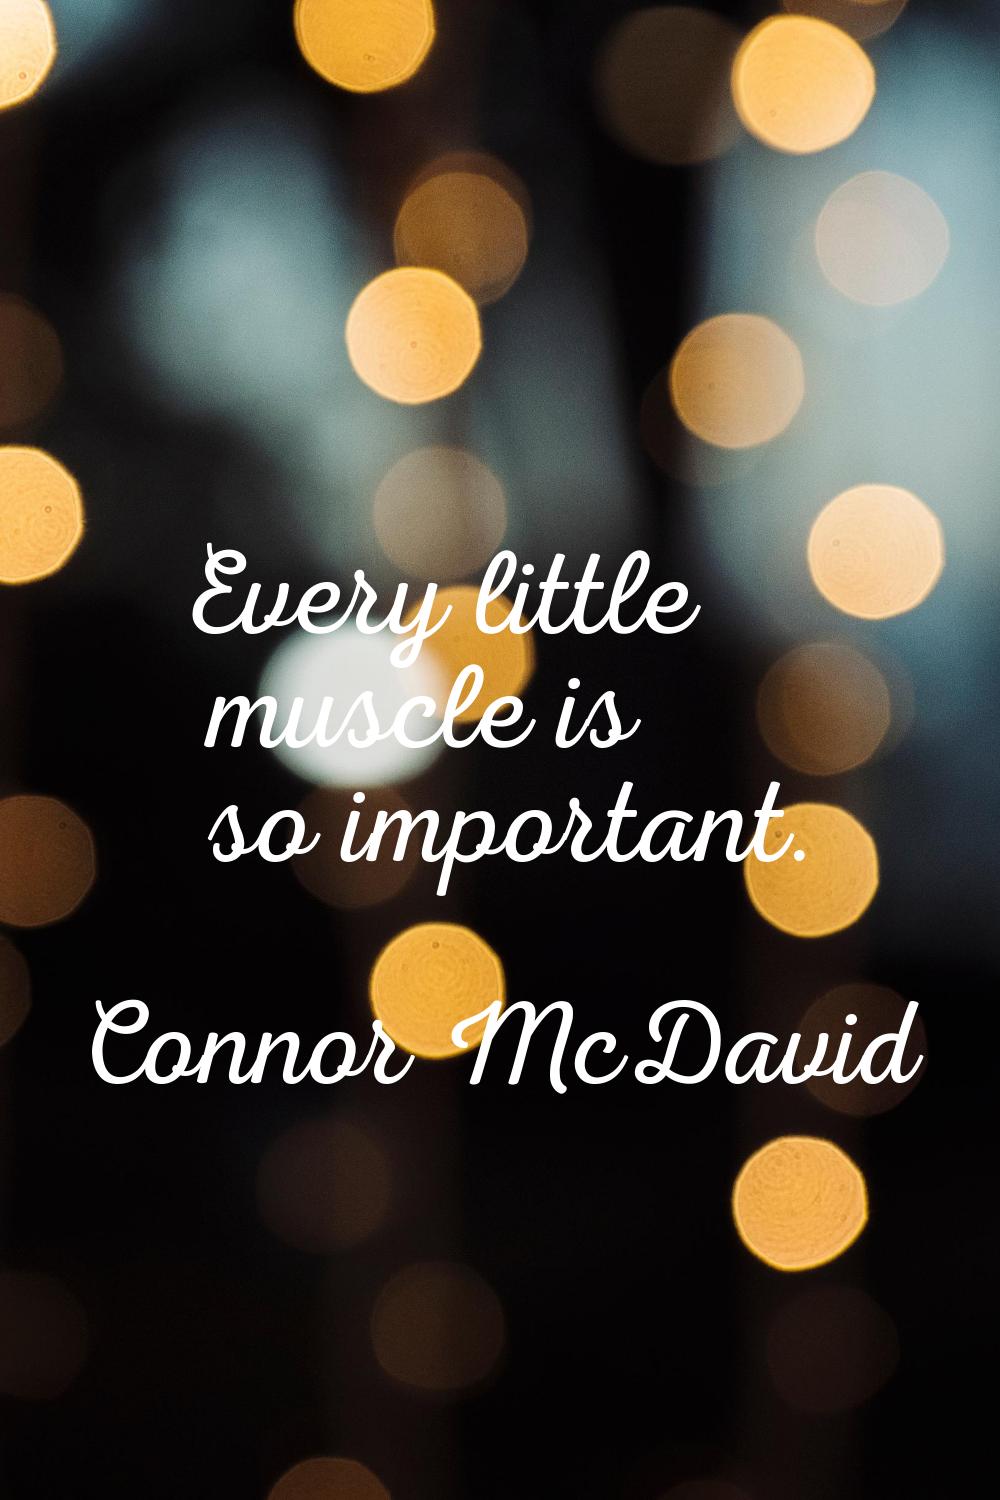 Every little muscle is so important.